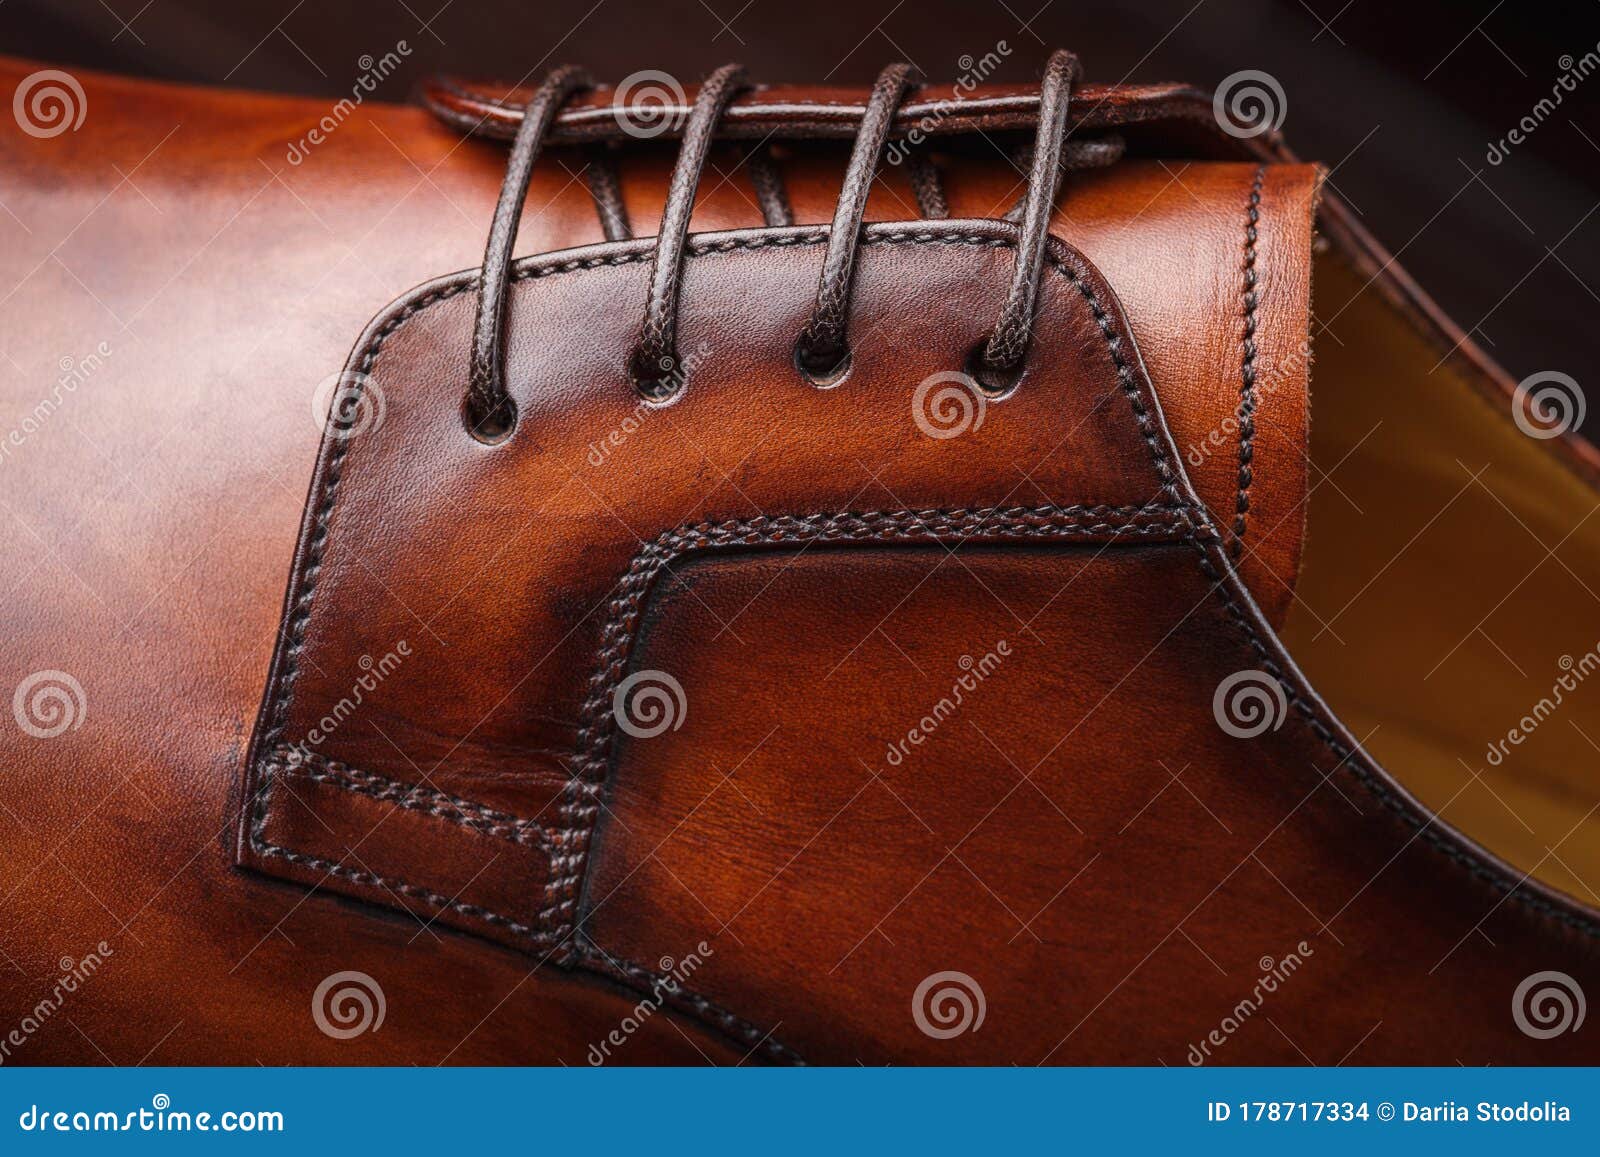 Close Up of a New Pair of Brown Leather Dress Shoes Stock Photo - Image ...